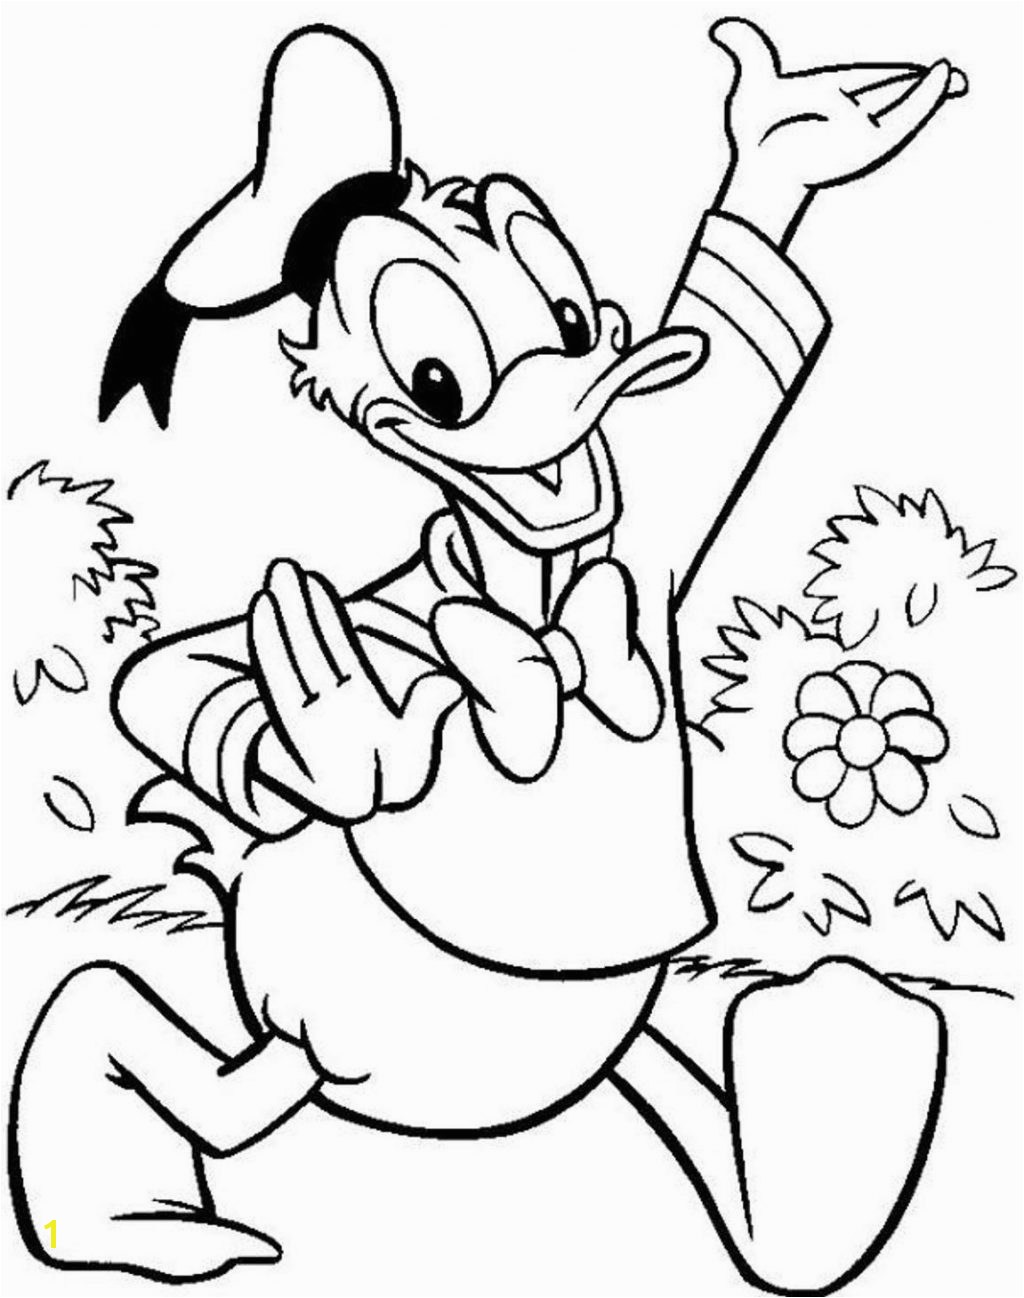 Duck Coloring Pages To Print Free Coloring Pages Download Xsibe